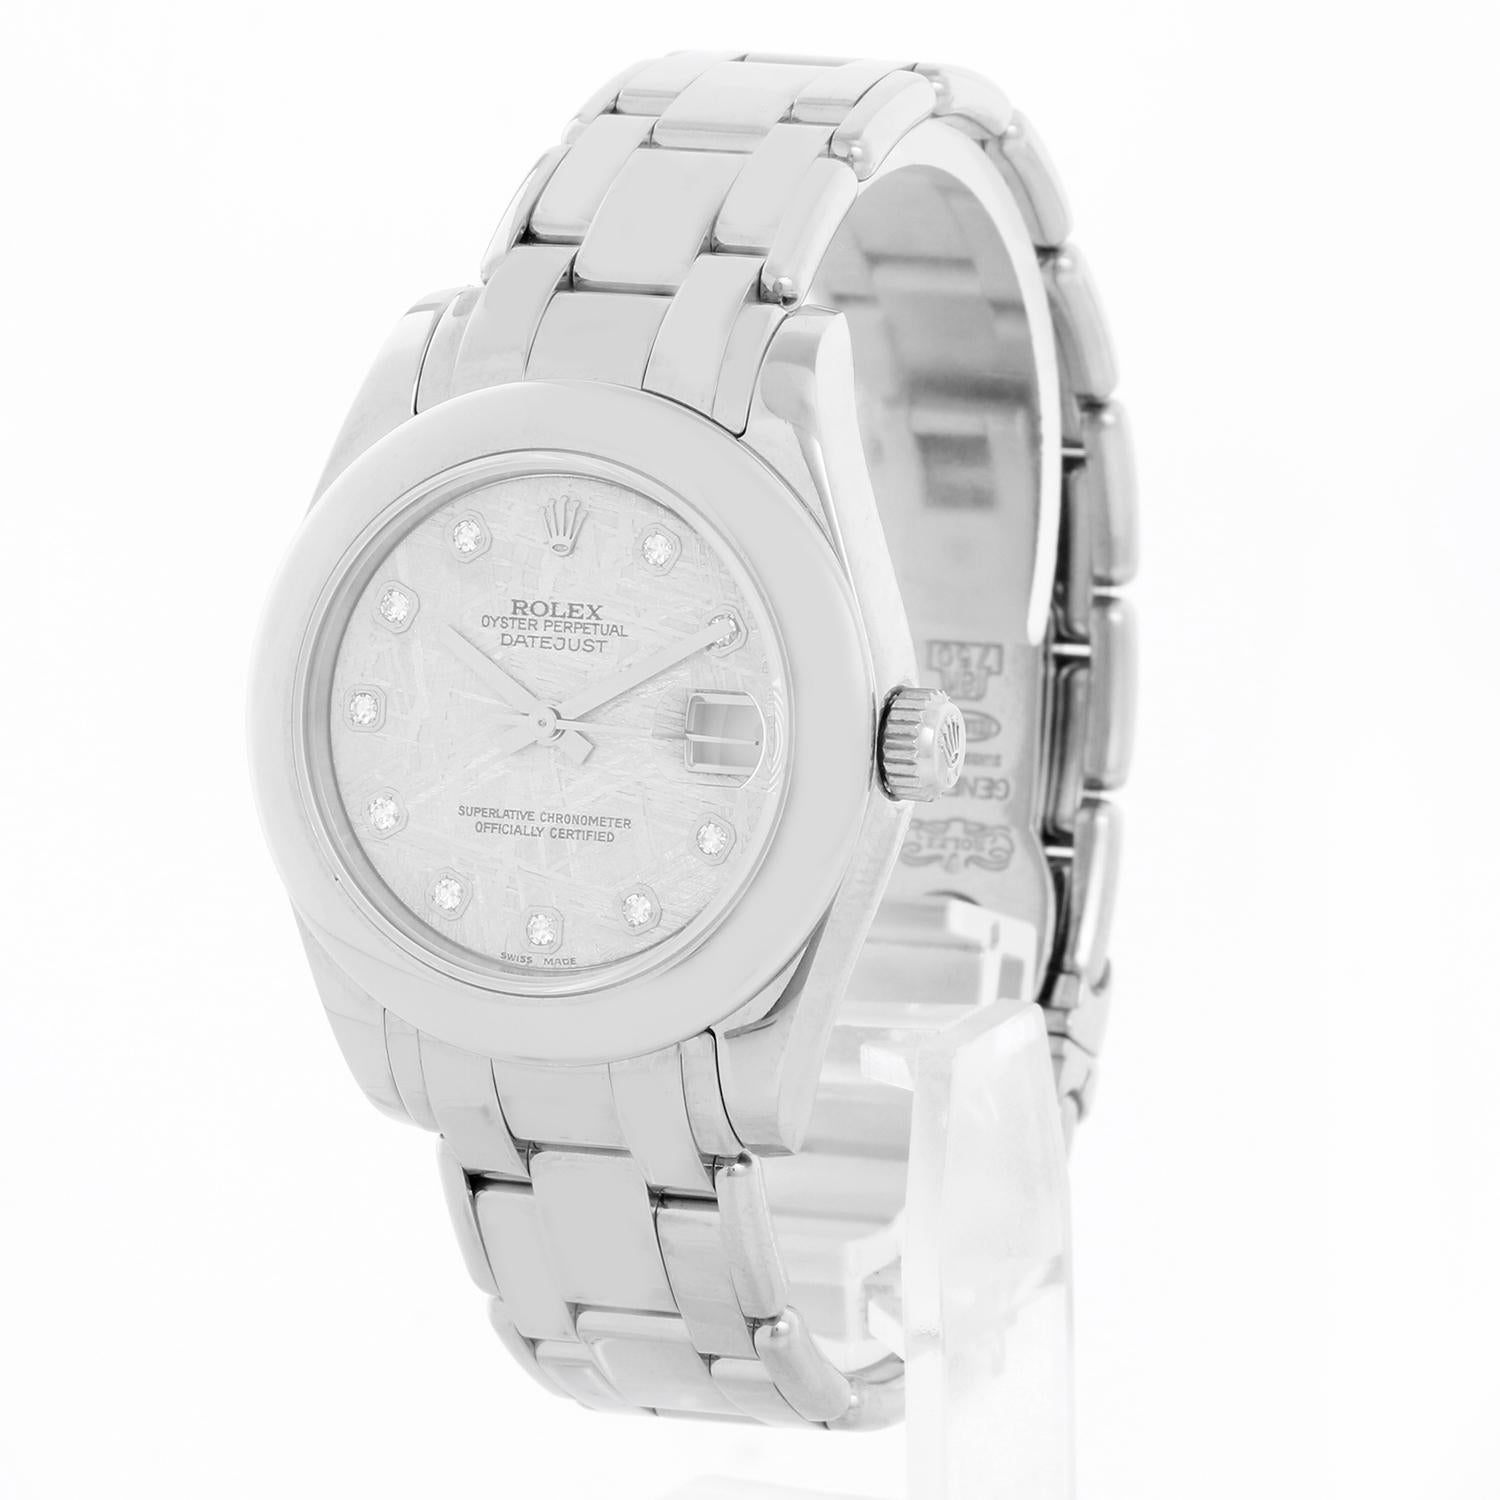 Rolex Ladies Pearlmaster Midsize White Gold Watch 81209 - Automatic winding, 31 jewels, Quickset, sapphire crystal. 18k white gold case with dome bezel  (34 mm ). Factory meteorite diamond dial. 18k white gold Pearlmaster bracelet. Pre-owned with